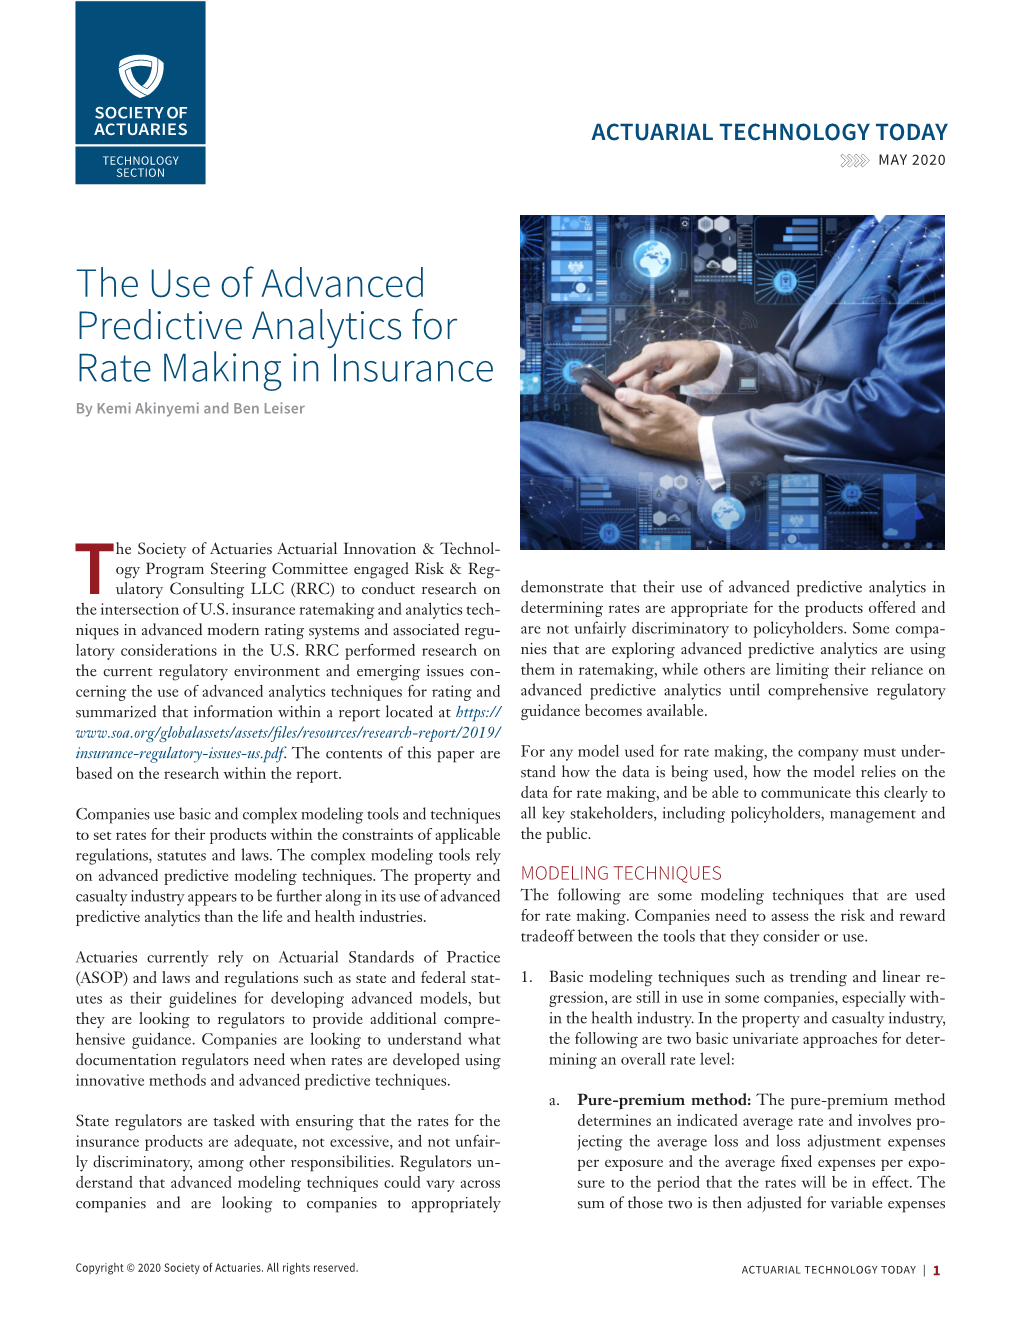 The Use of Advanced Predictive Analytics for Rate Making in Insurance by Kemi Akinyemi and Ben Leiser